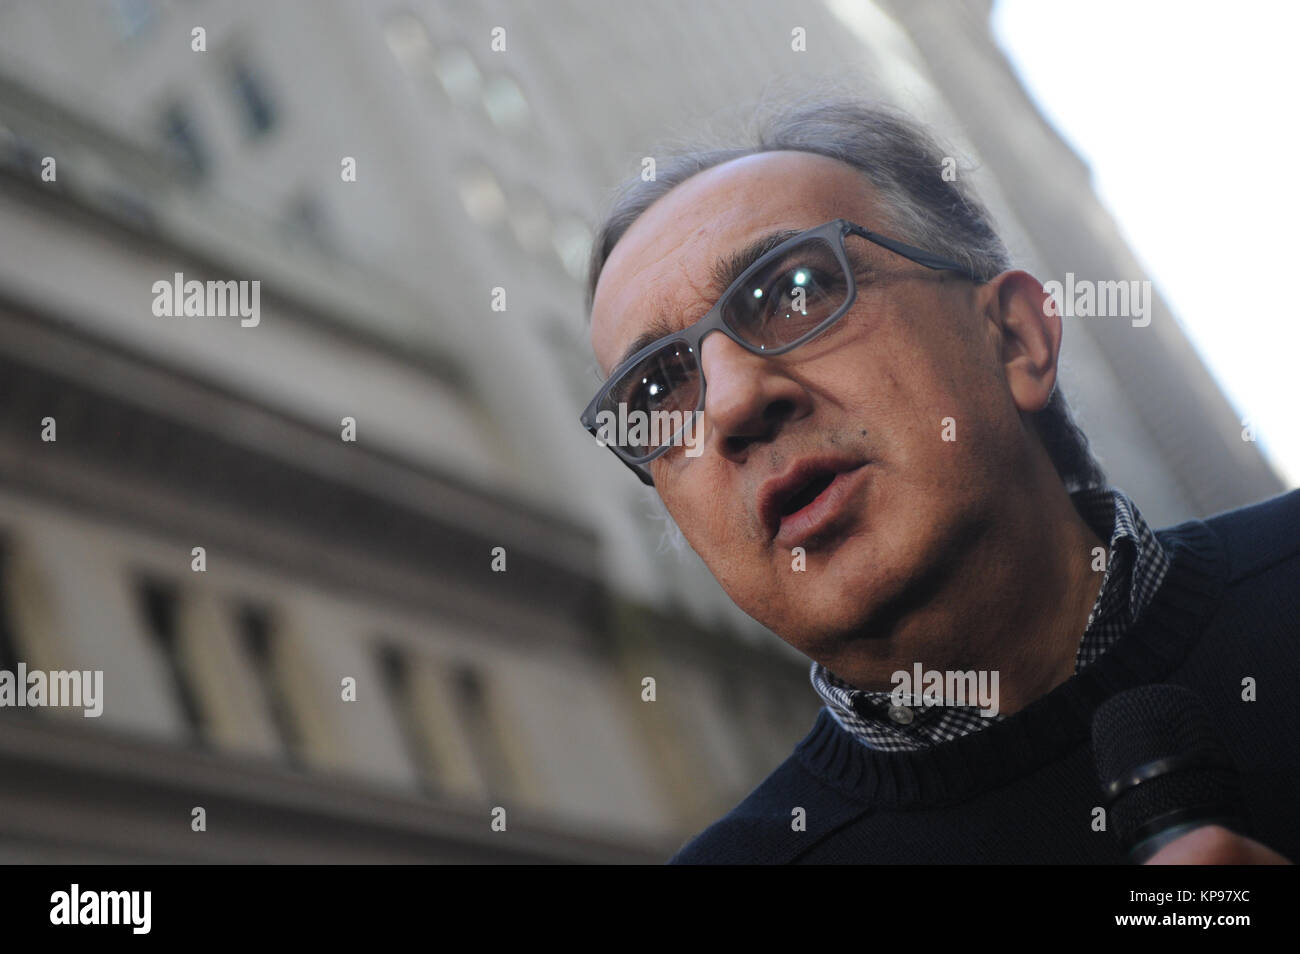 NEW YORK, NY - OCTOBER 21: Chief Executive Officer of Fiat Chrysler Automobiles Group Sergio Marchionne applauds after ringing the opening bell at the New York Stock Exchange (NYSE) as Ferrari starts trading for the first day in New York on Oct. 21, 2015. Ferrari's roaring debut on Wall Street Êalso Ferrari CEO Amedeo Felisa at the NYSE ahead of the racecar makerÕs stock market debut  on October 21, 2015 in New York City.  People:  Guests Stock Photo